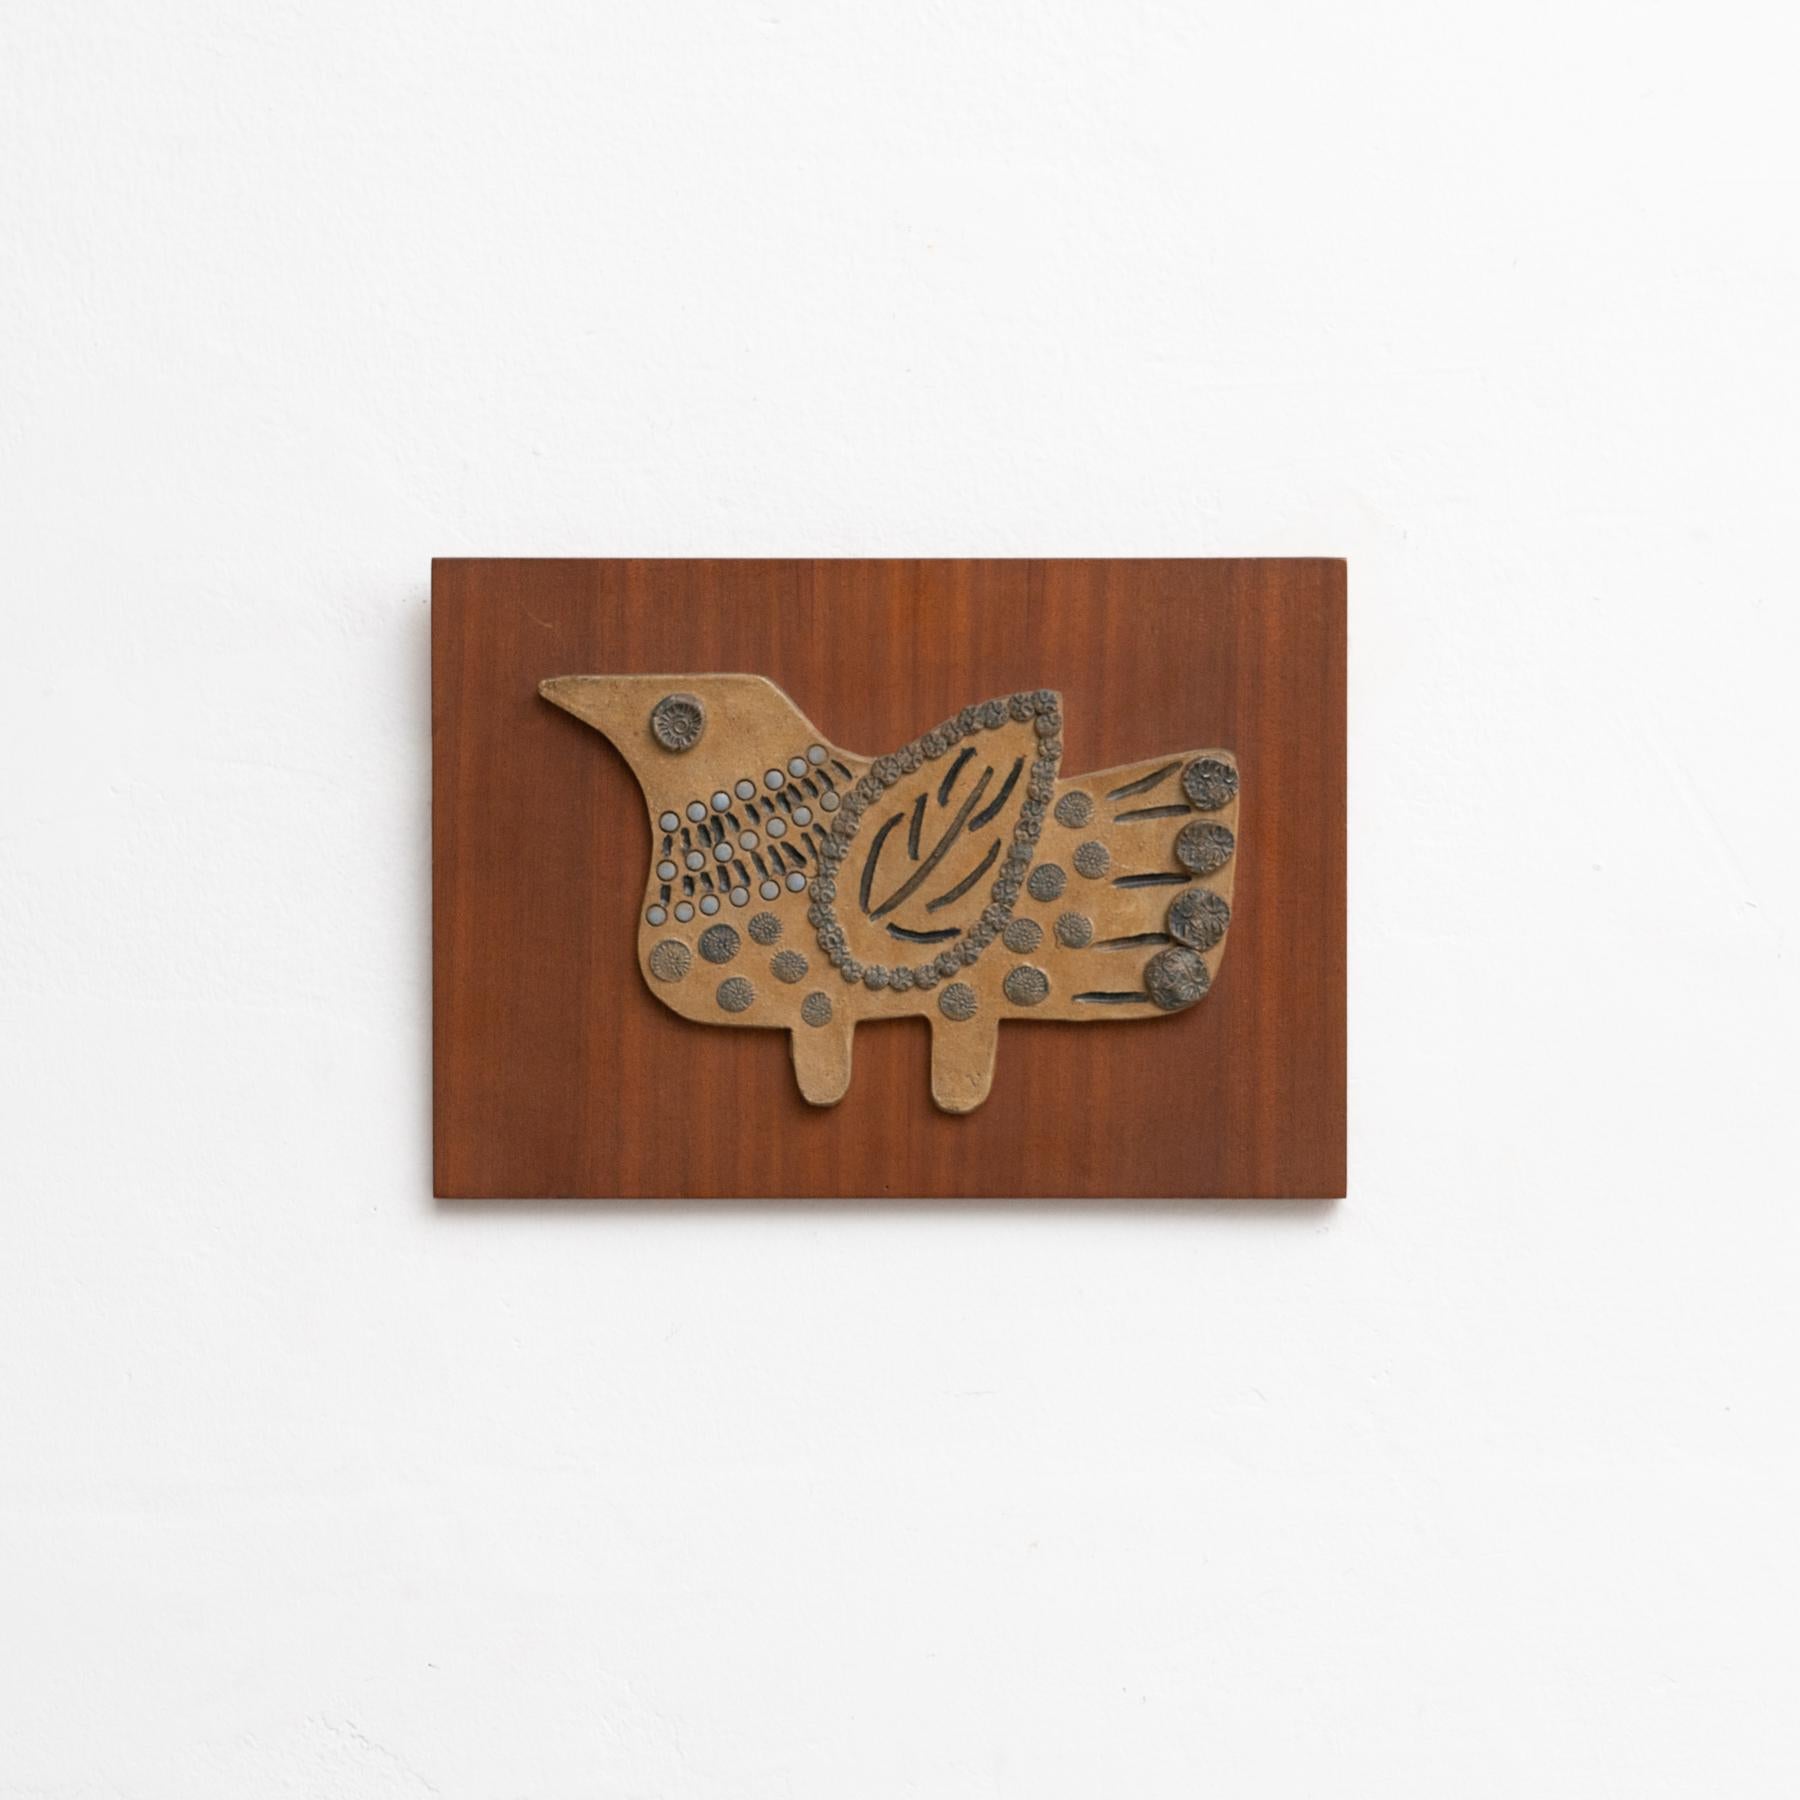 Mid-Century Modern Brutalist Ceramic Artwork on a Wooden Wall Board, circa 1960 For Sale